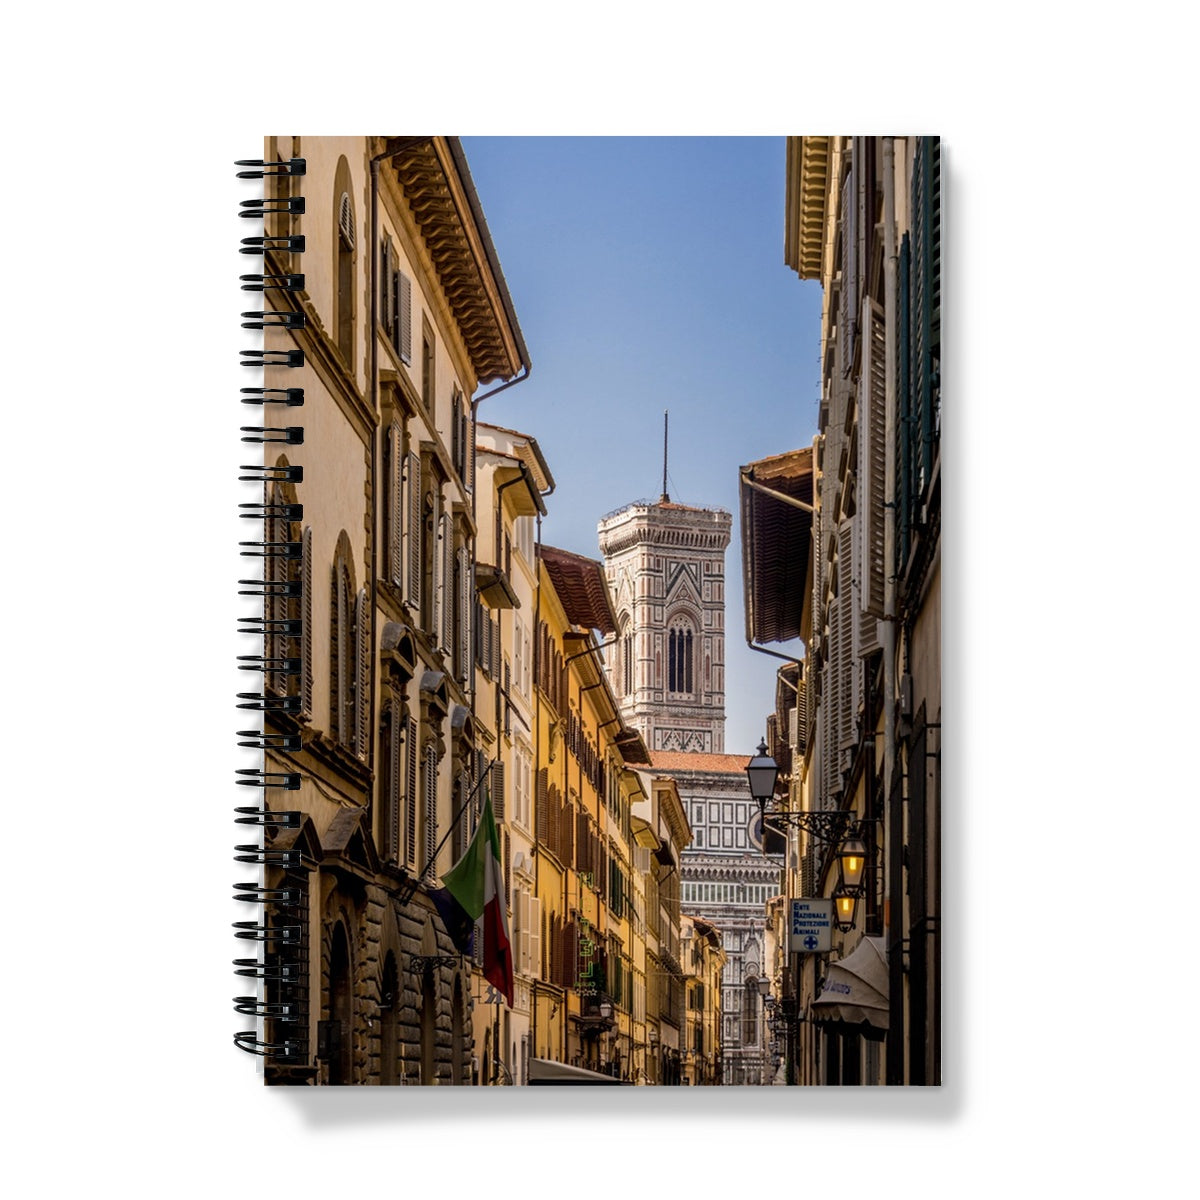 Giotto's Campanile glimpsed between buildings in the city of Florence, Italy. Notebook